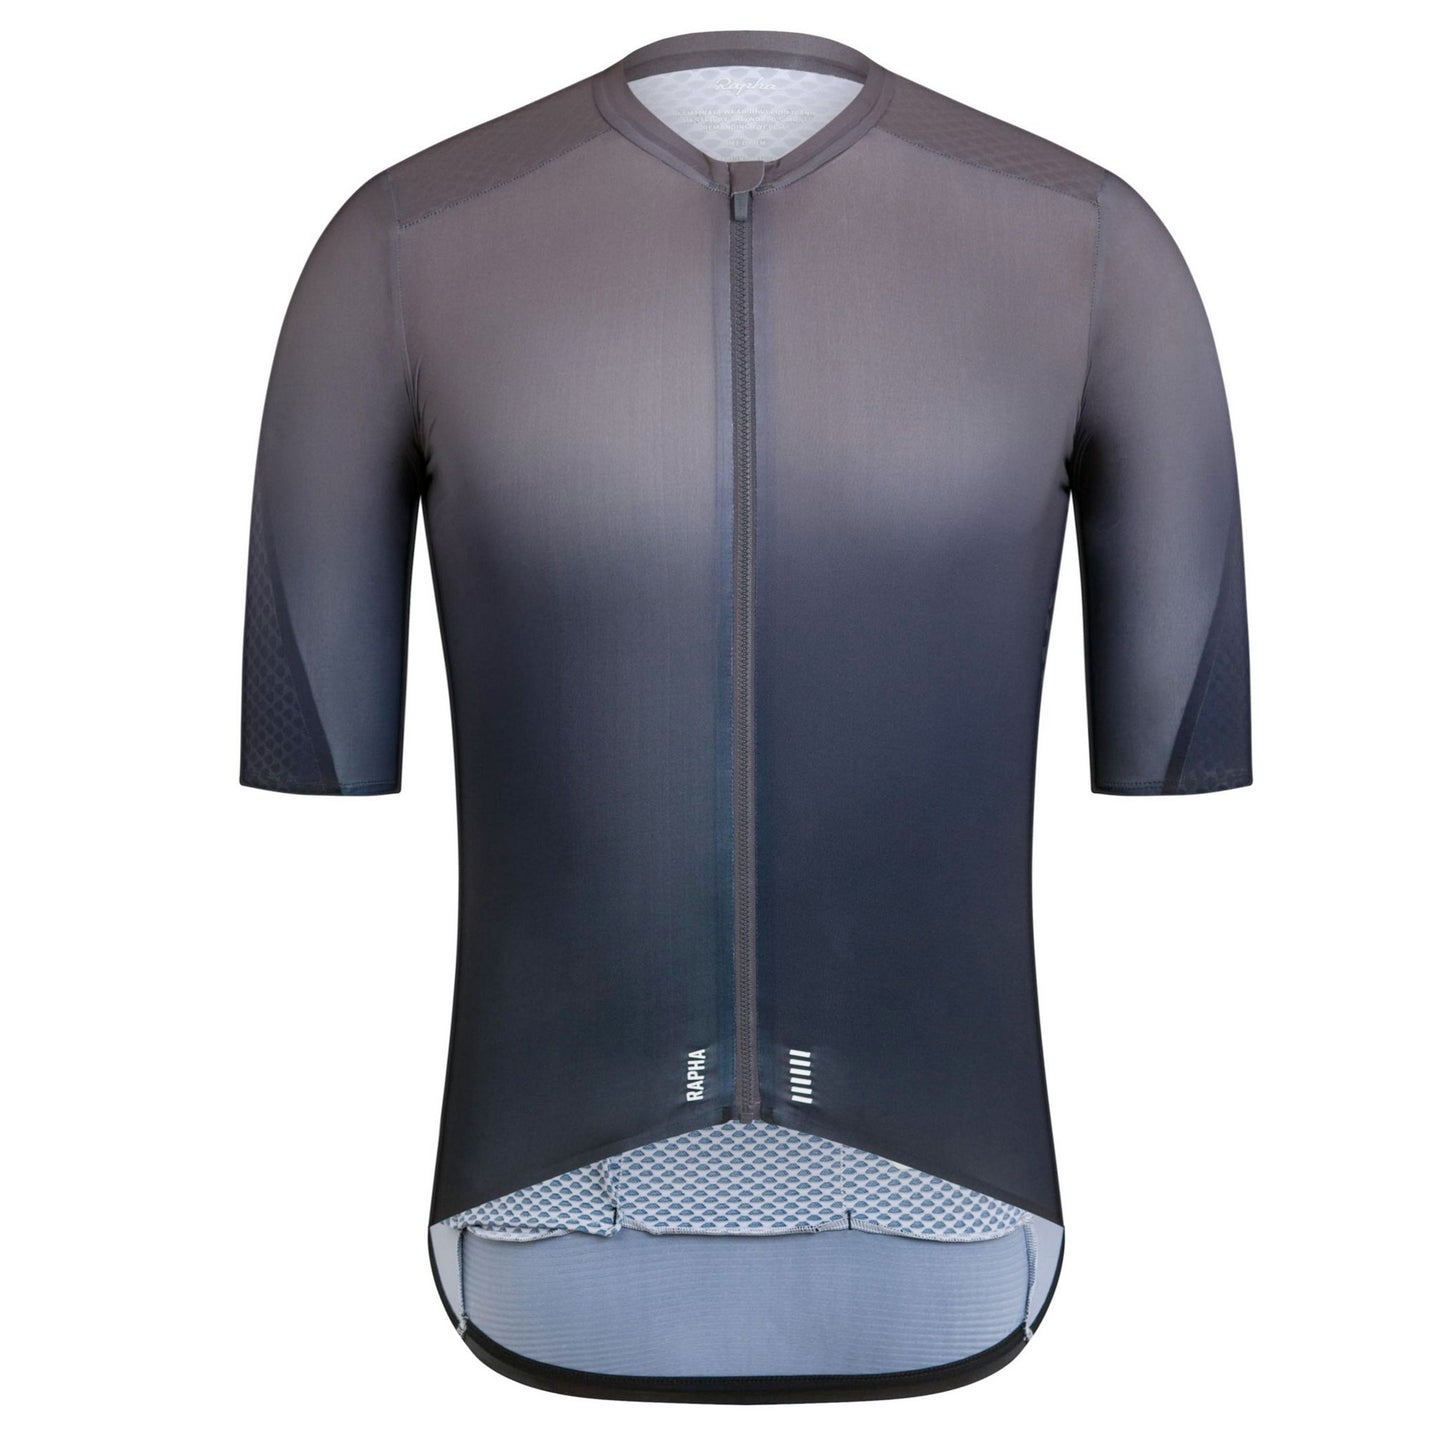 Rapha Men's Pro Team Aero Jersey - Fade buy at Woolys Wheels bike shop Sydney with free delivery